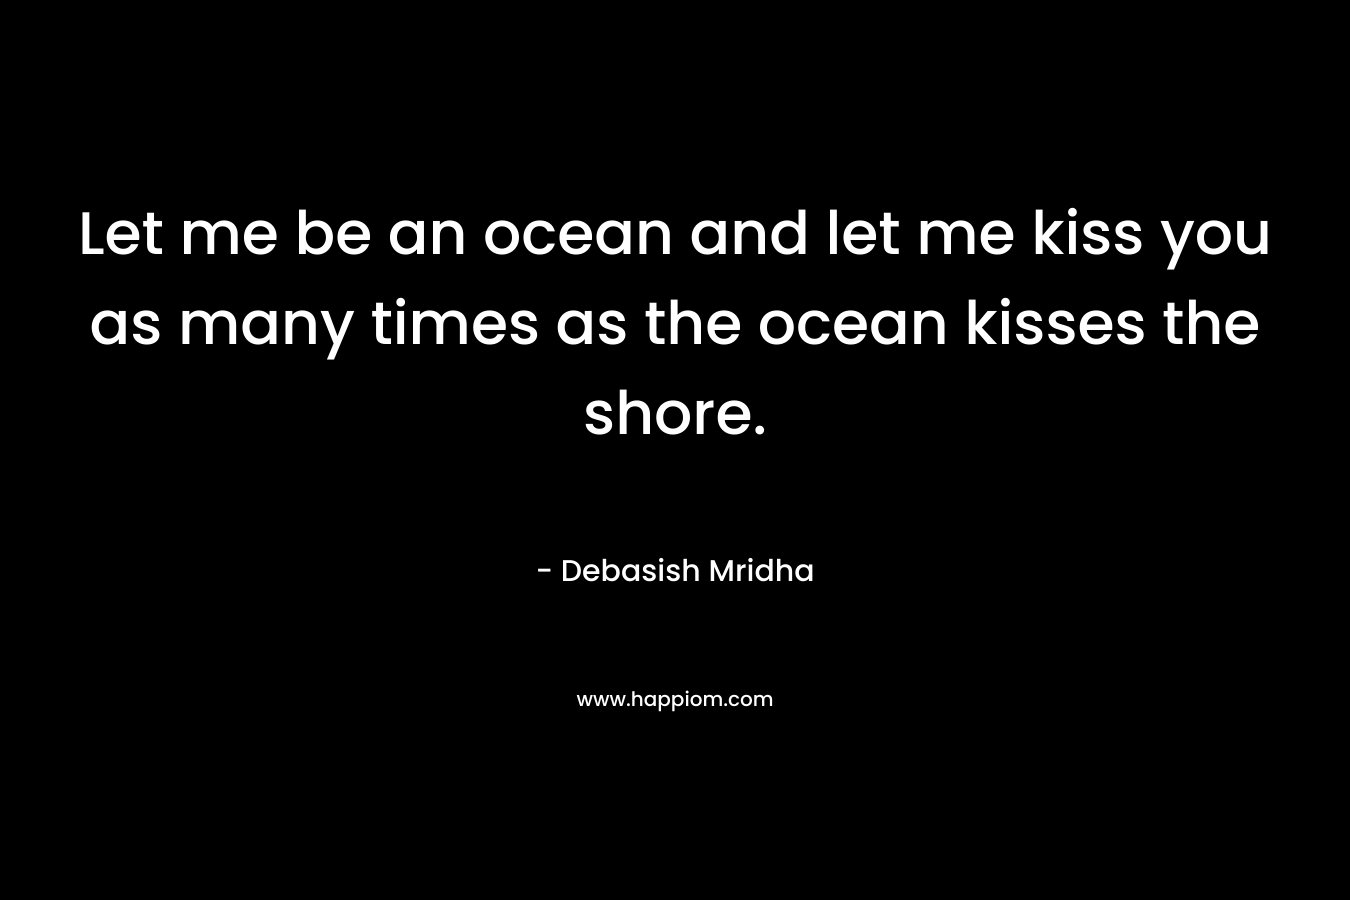 Let me be an ocean and let me kiss you as many times as the ocean kisses the shore.